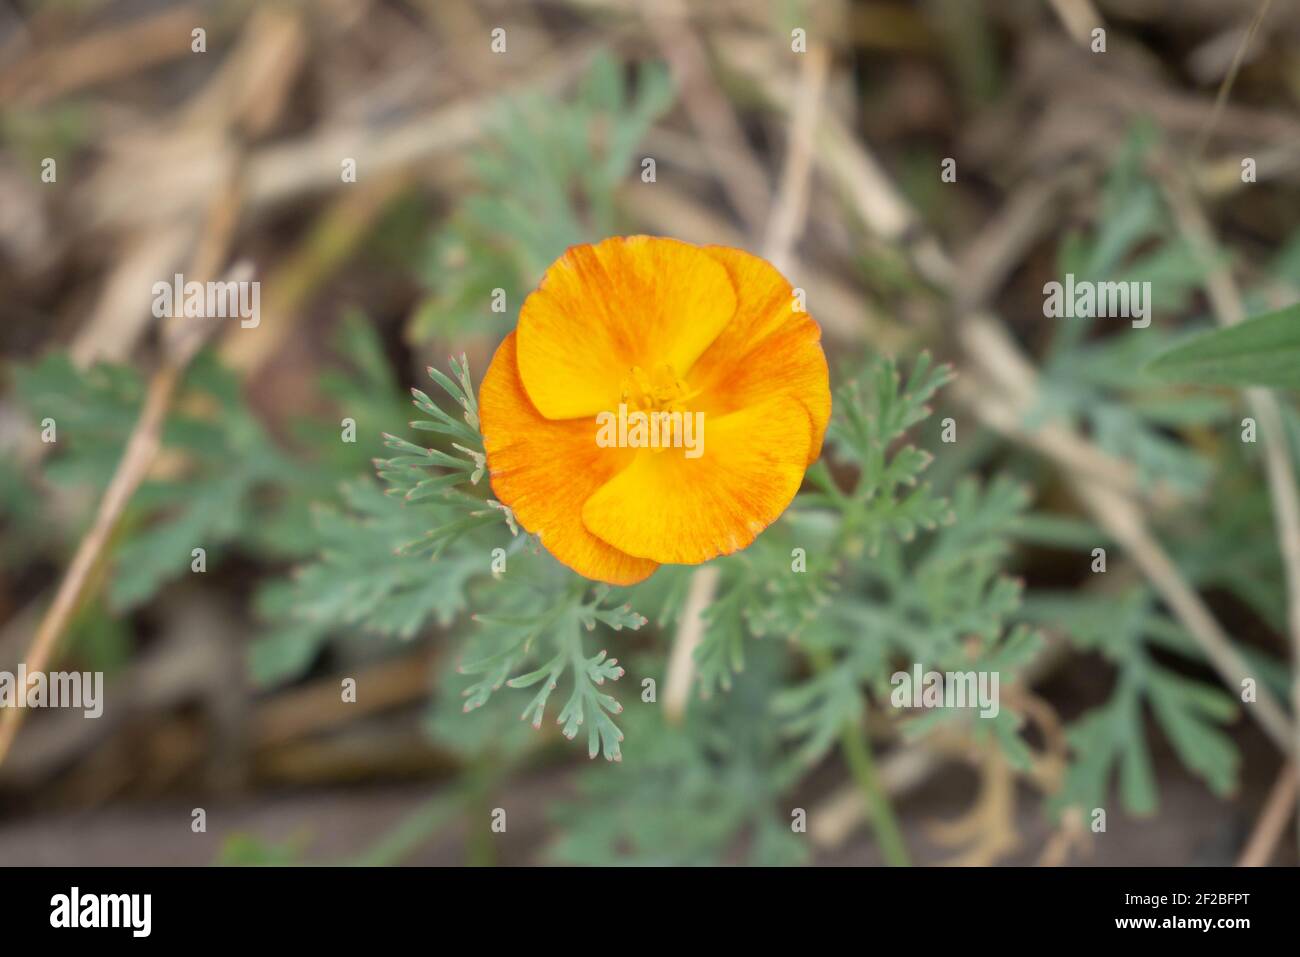 Ranunculus creeping lonely flower in the center of the photo on a blurred background. Flower Petals Striped Yellow Orange Stock Photo